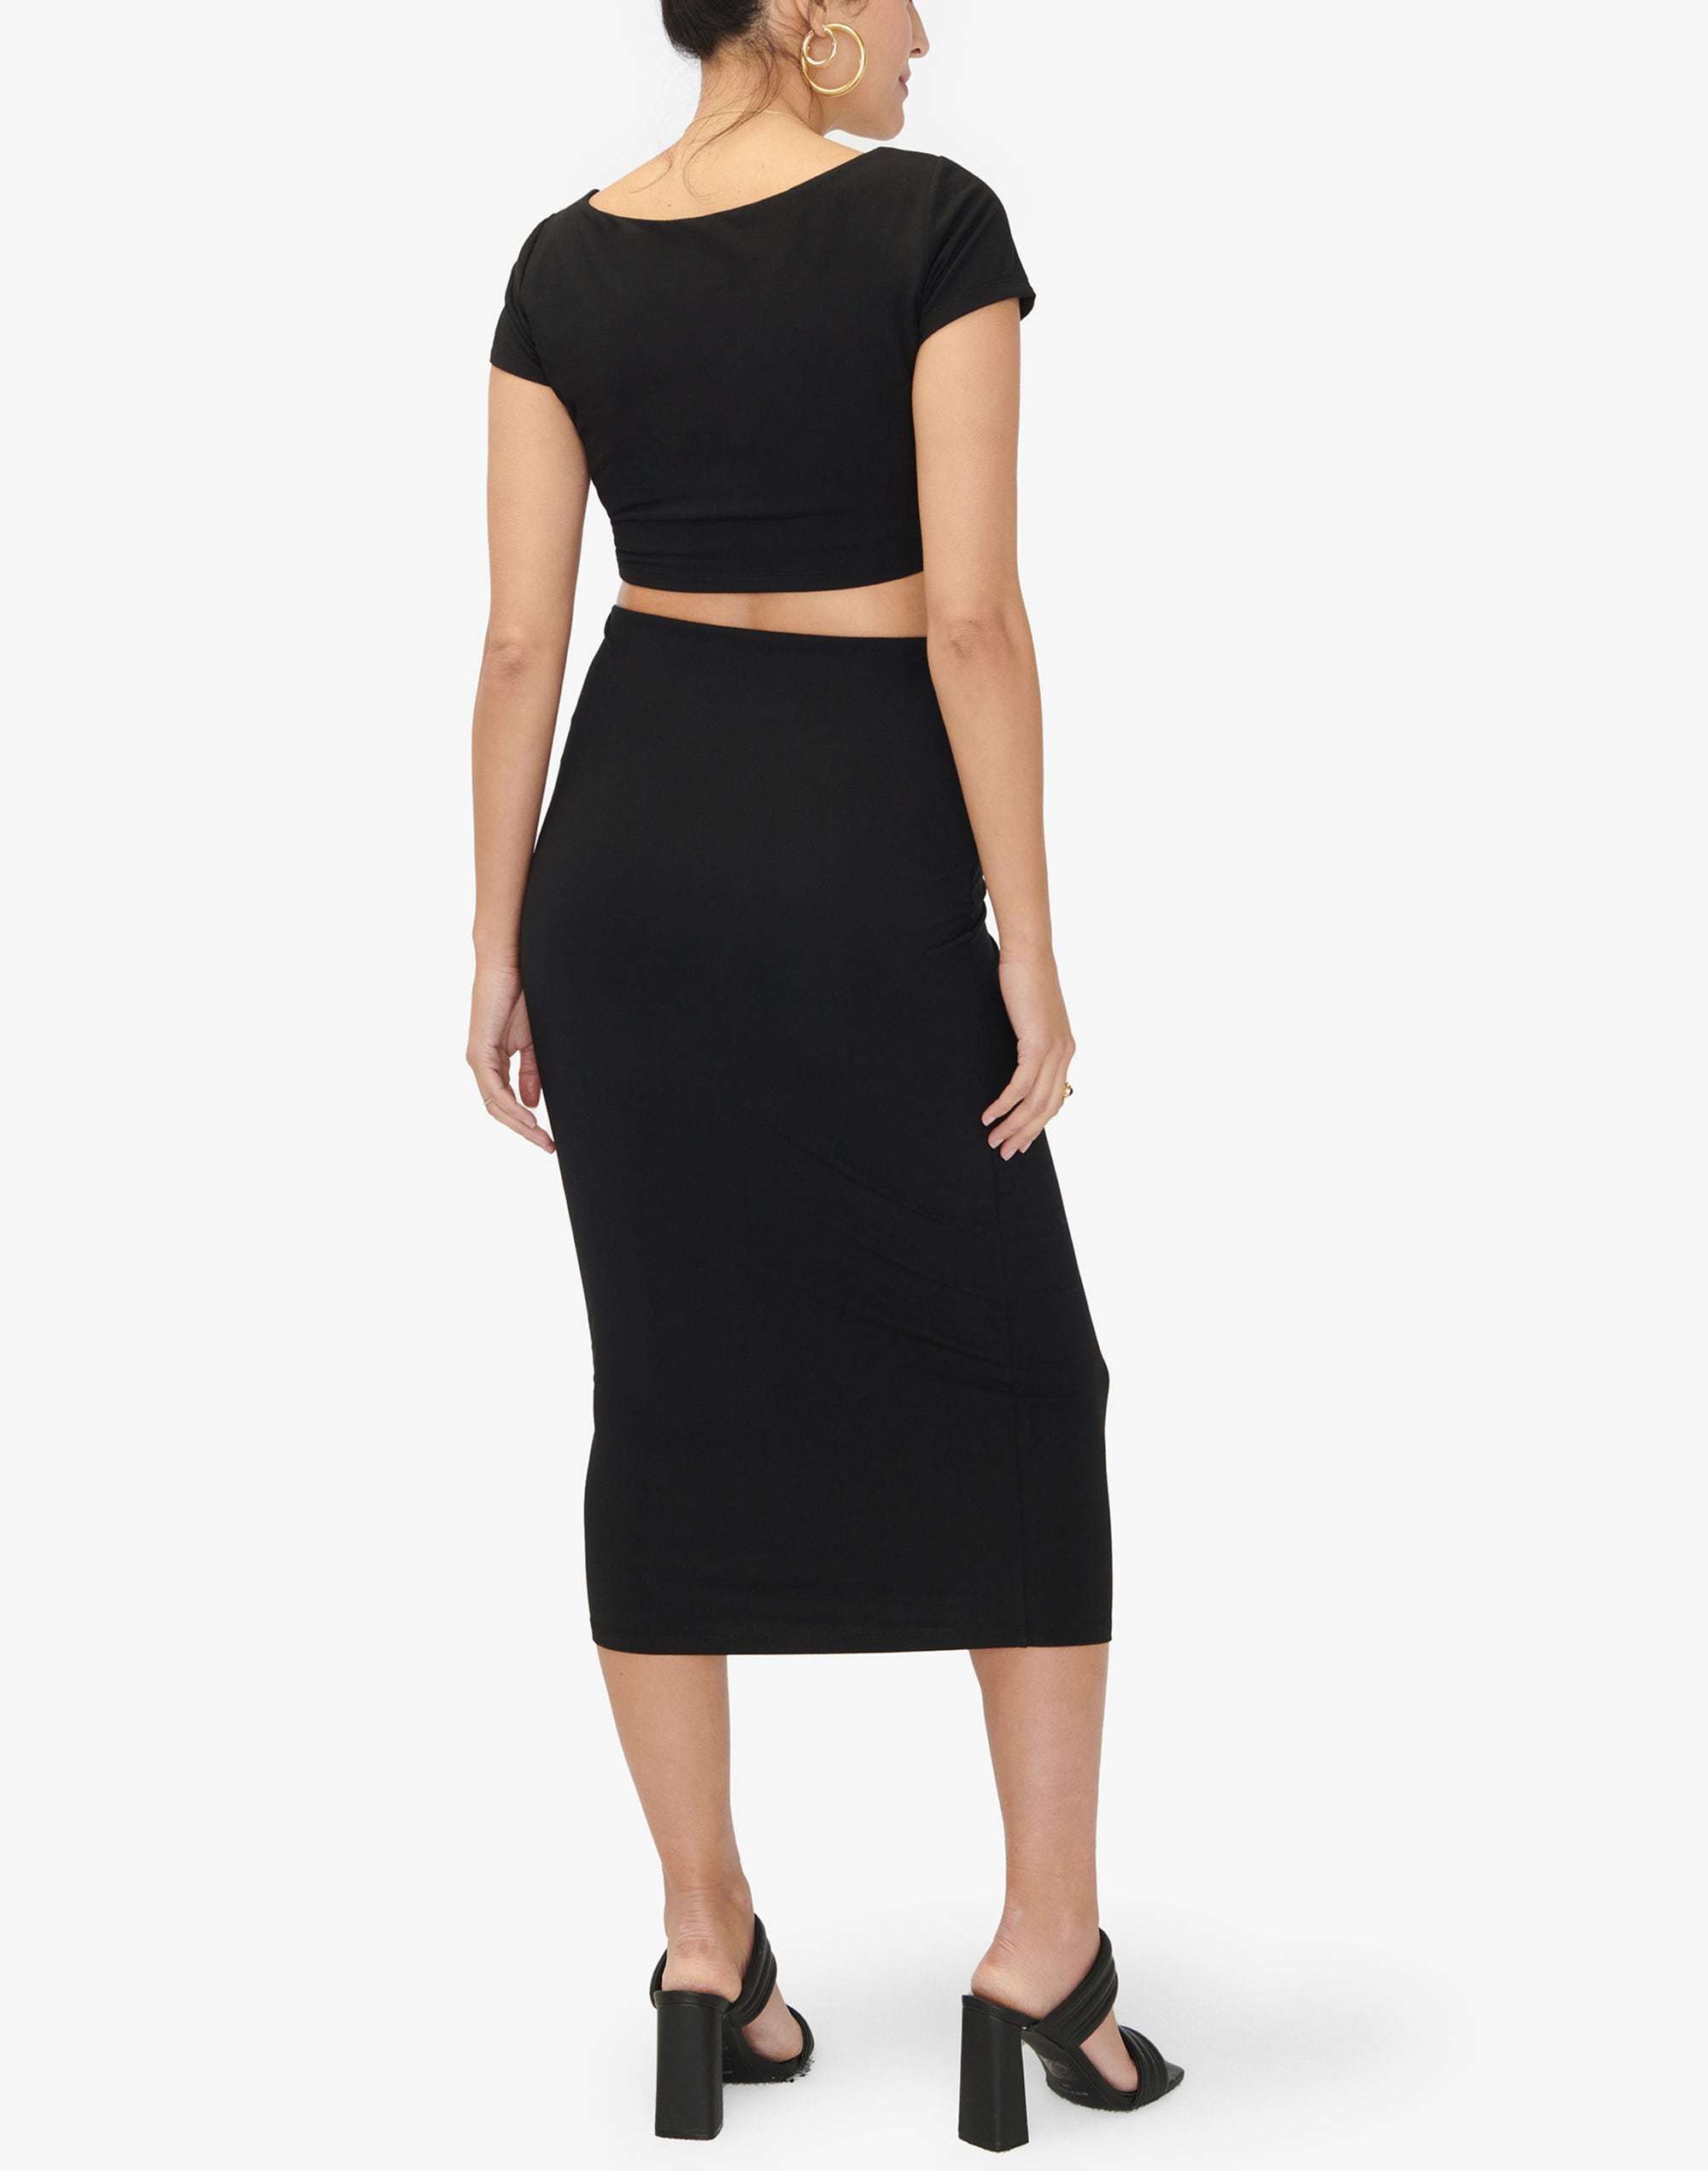 HATCH Collection The Body Midi Skirt